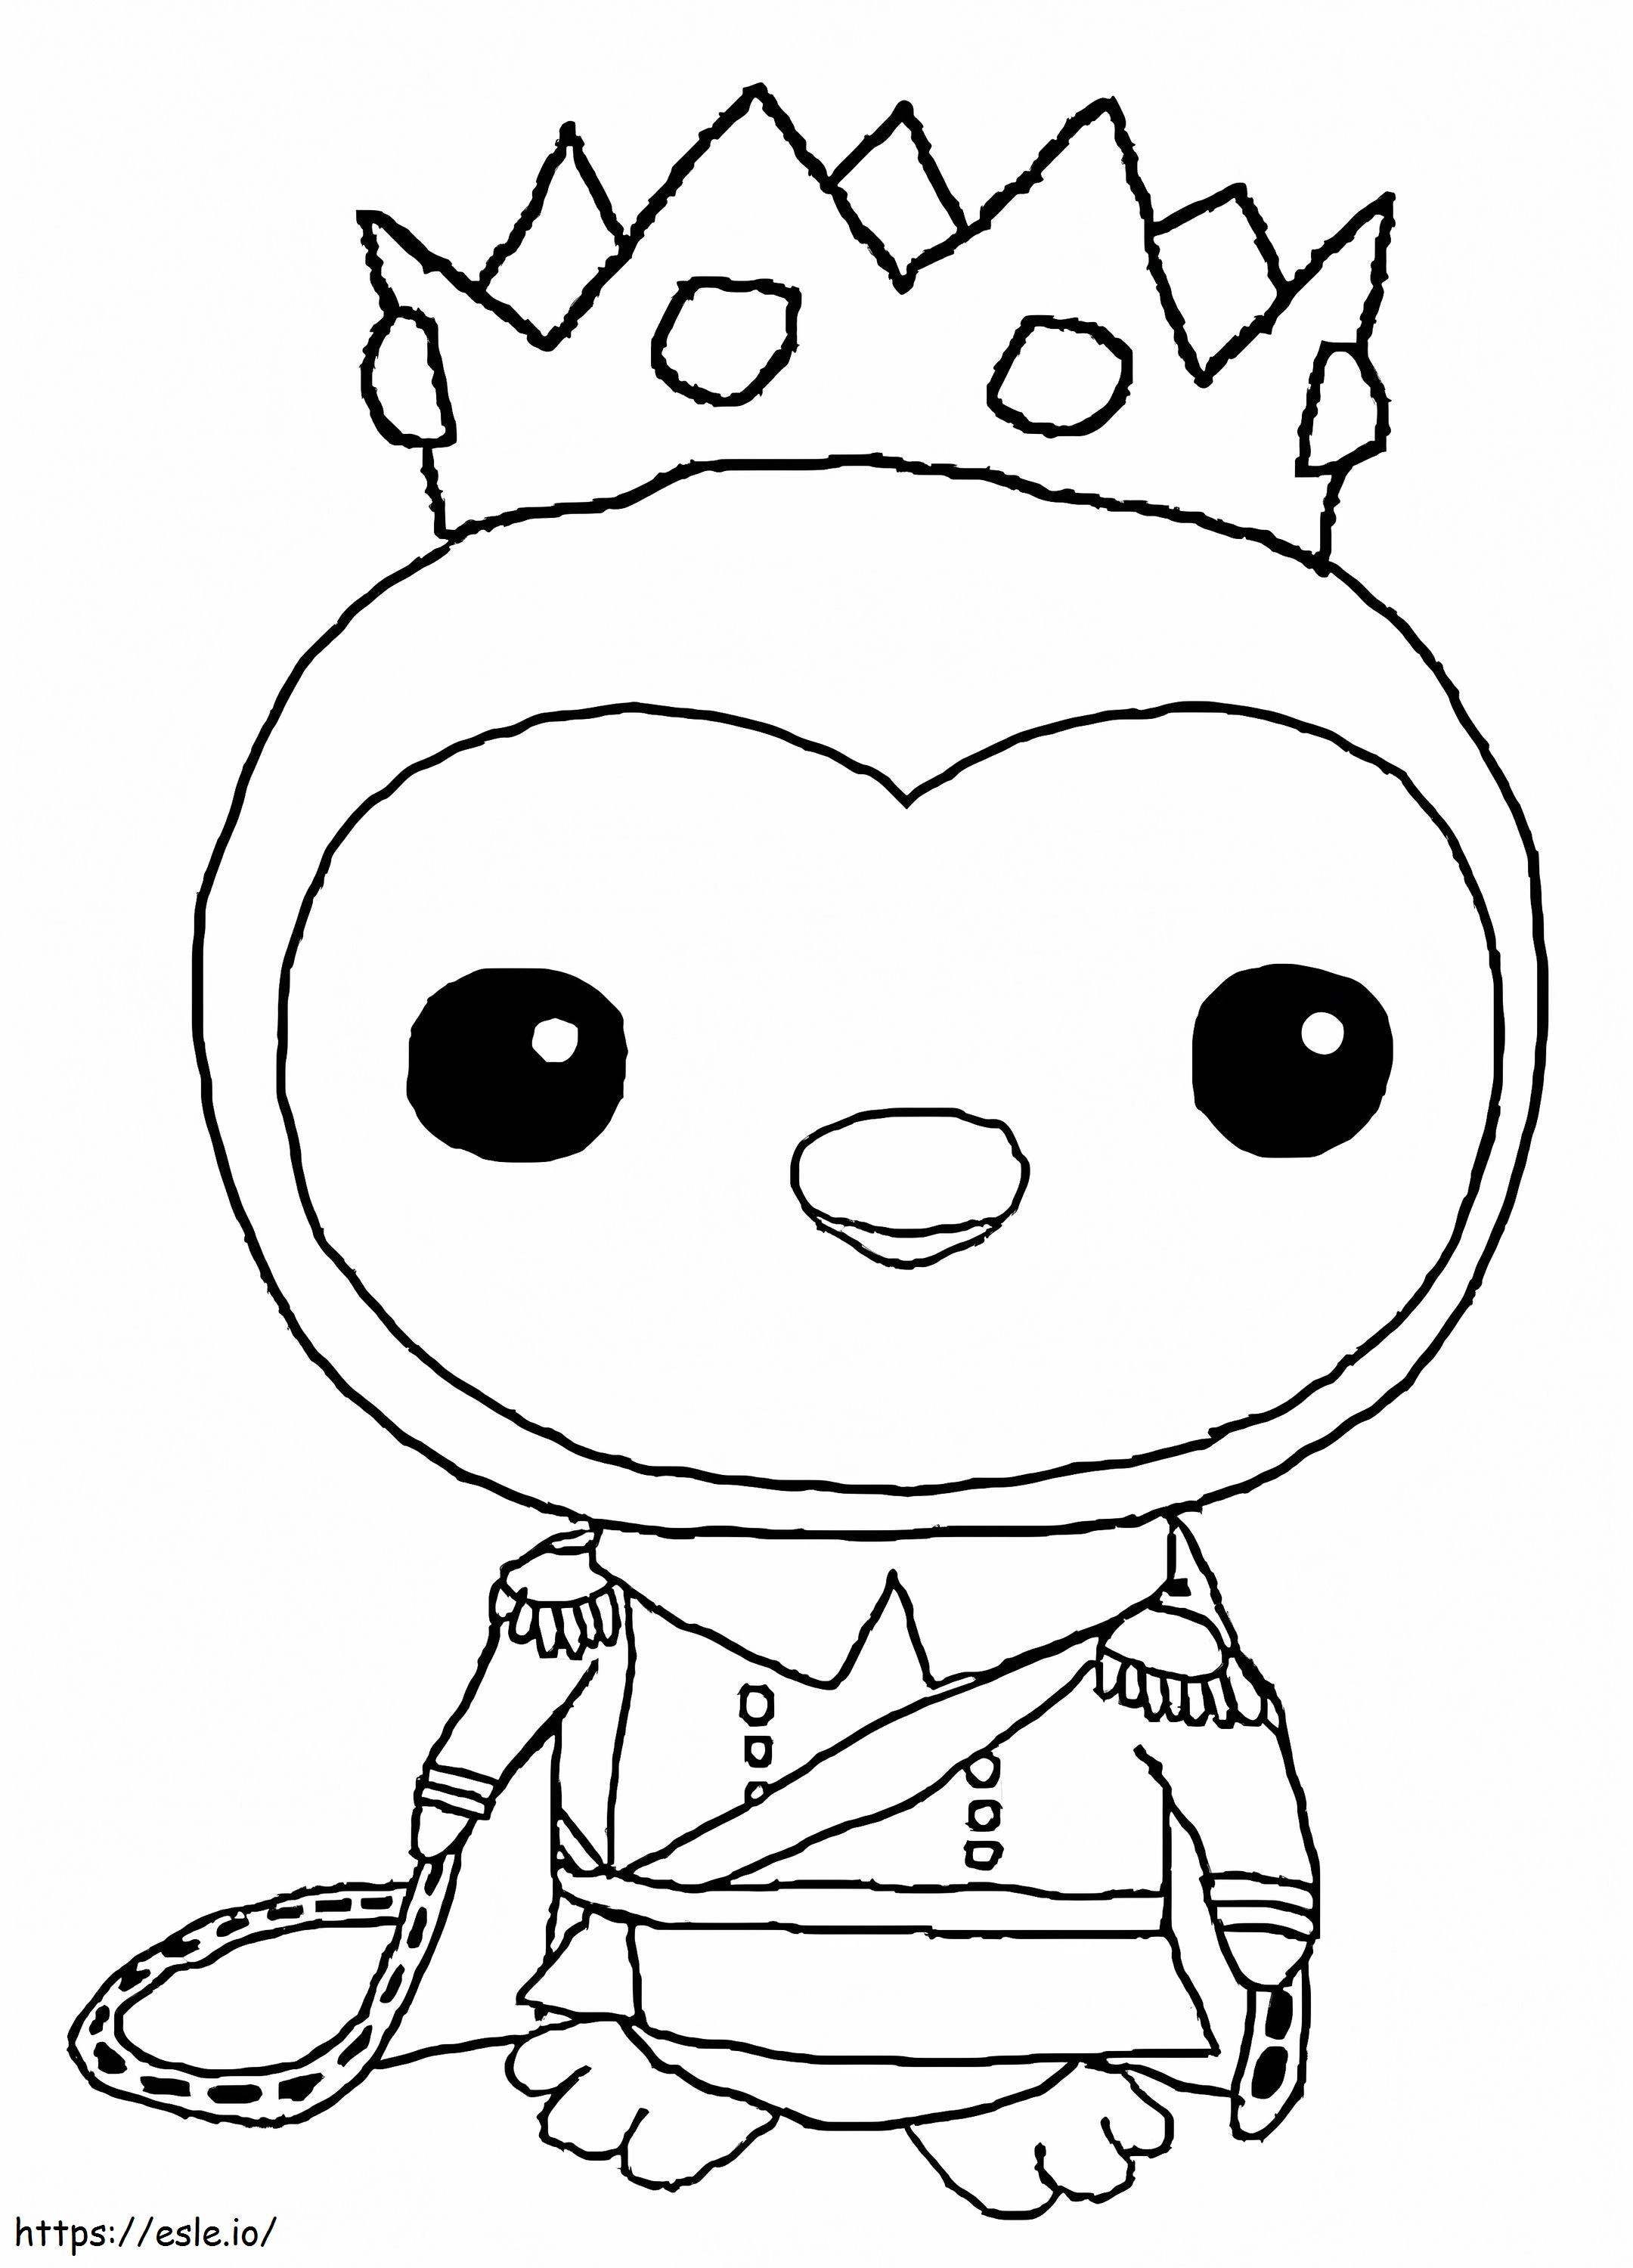 Queen'S Weight coloring page